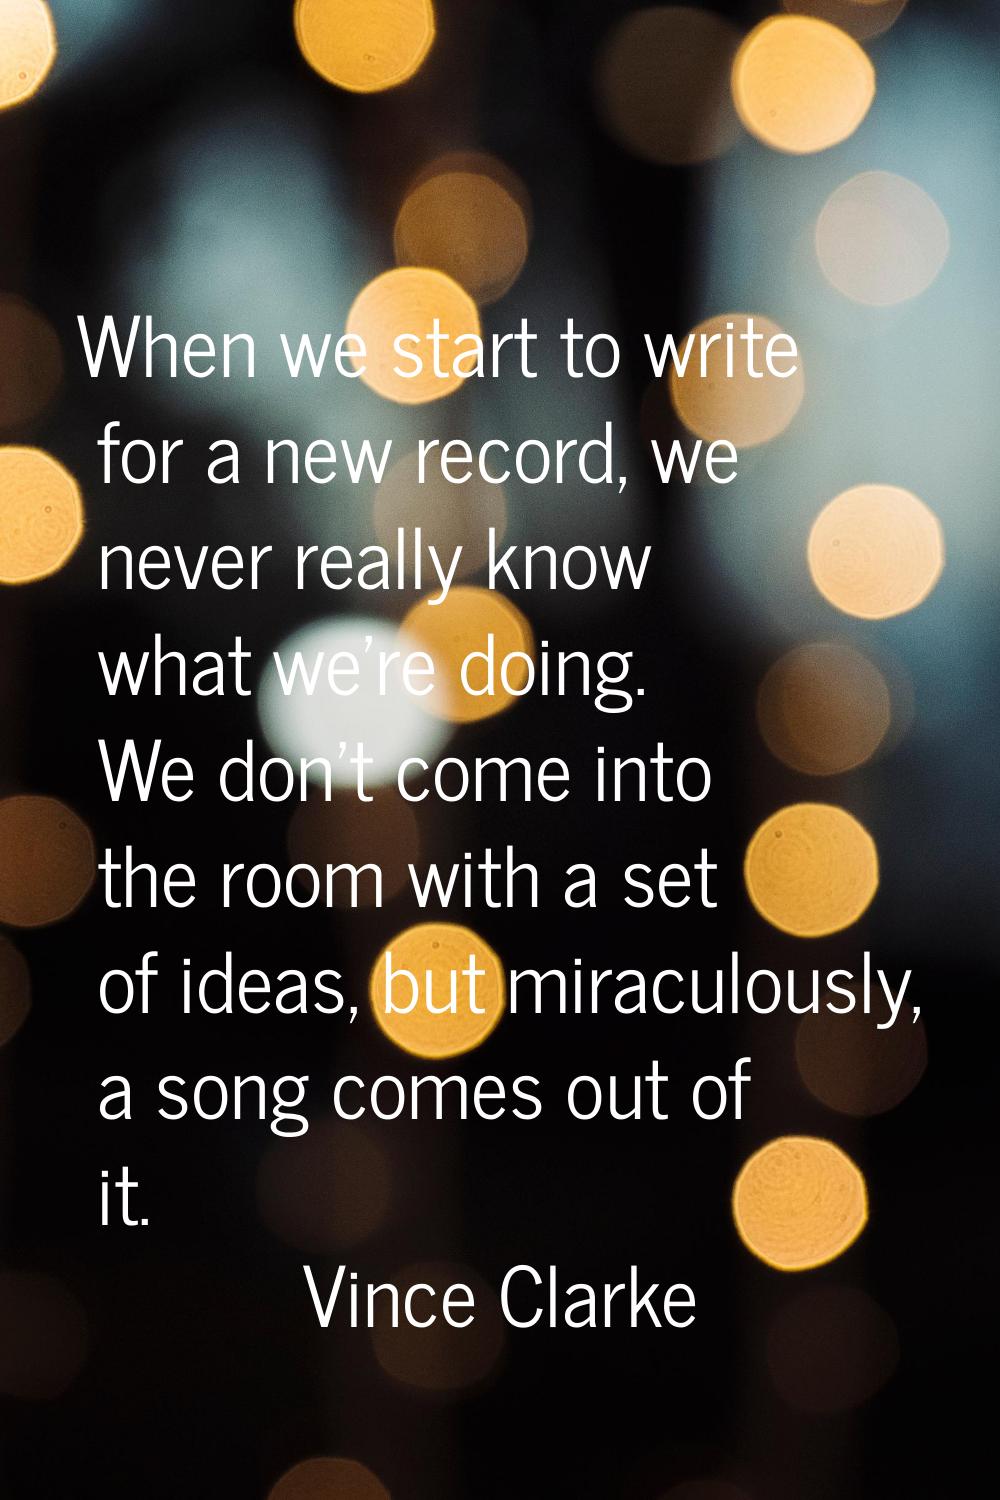 When we start to write for a new record, we never really know what we're doing. We don't come into 